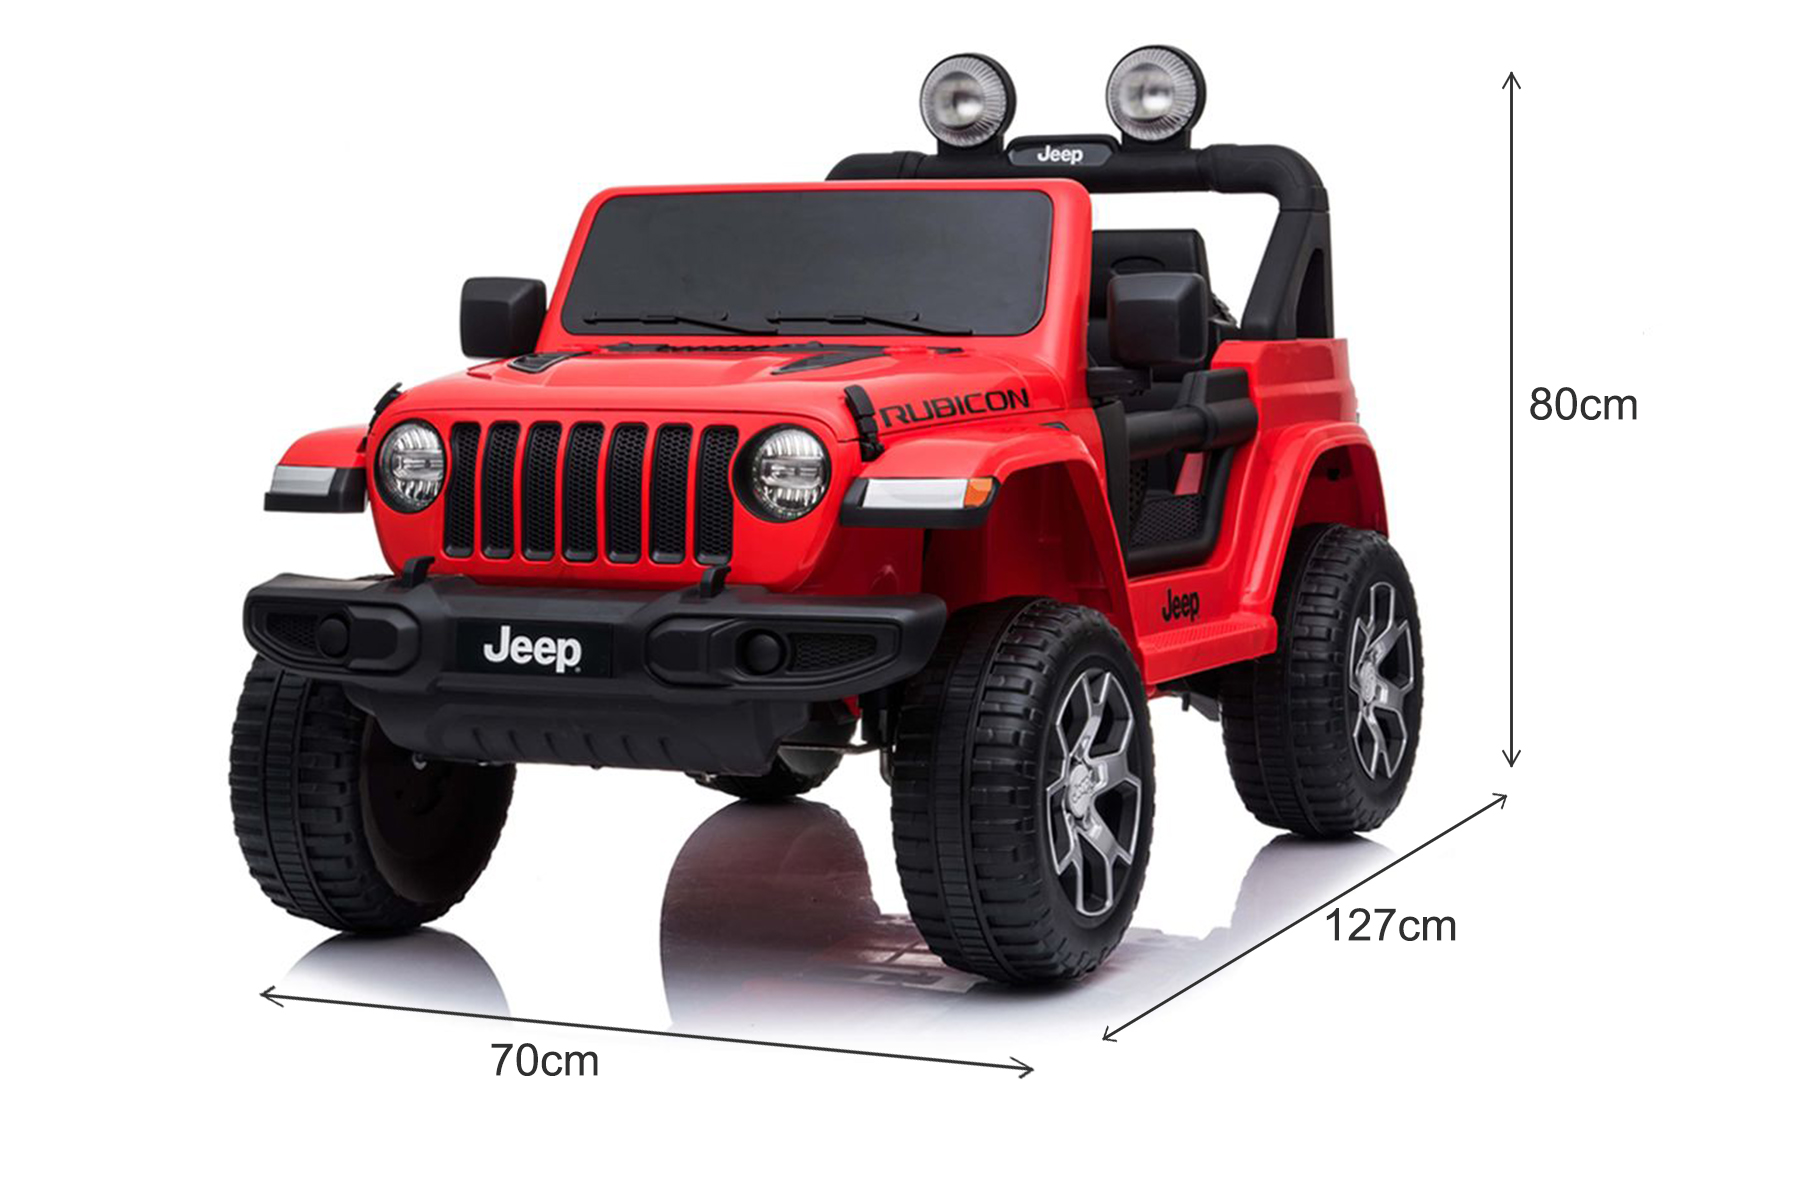 Details about   12V Kids Ride on Toy Car Jeep Wrangler Electric Battery w/ Remote Control White 